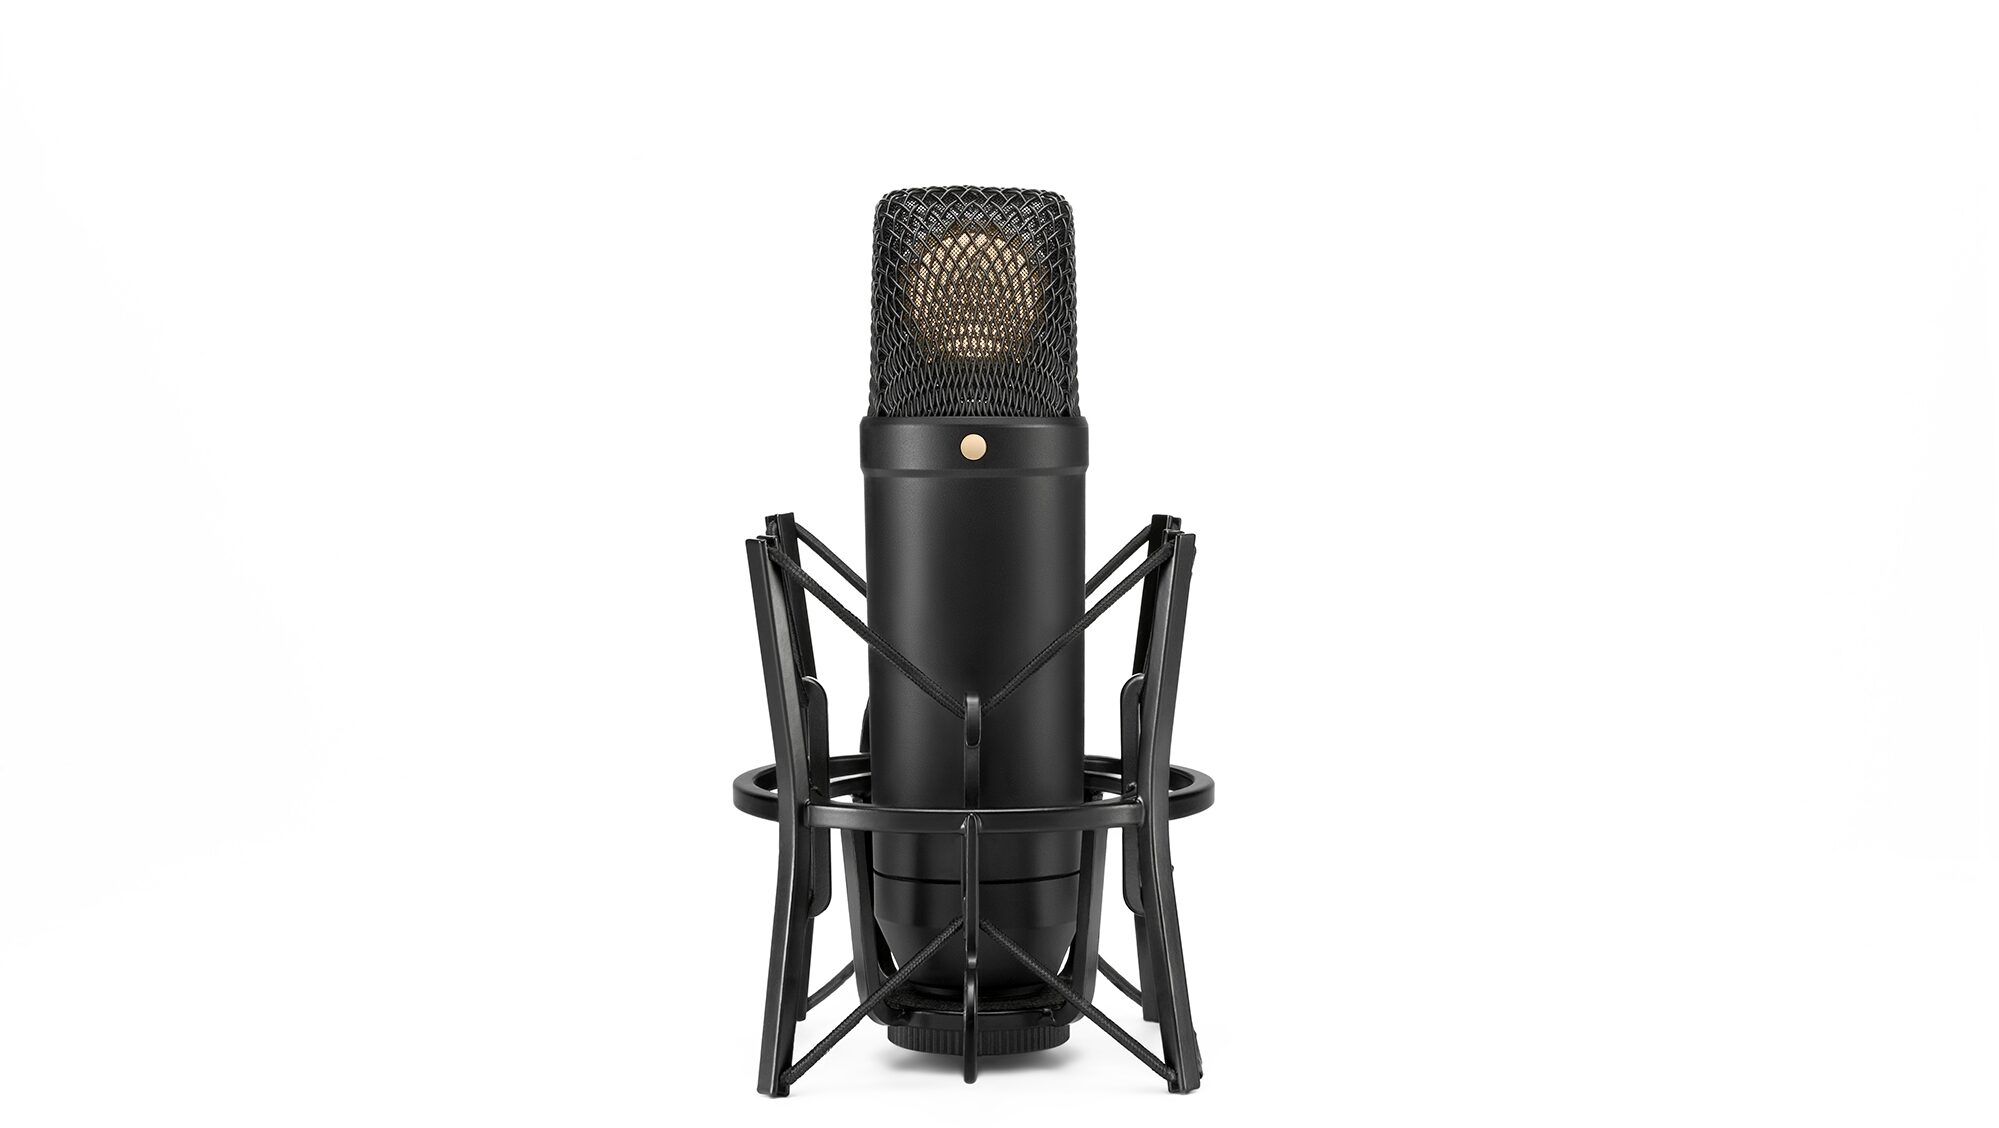 Rode NT1-A Complete Vocal Recording - The Rock Store